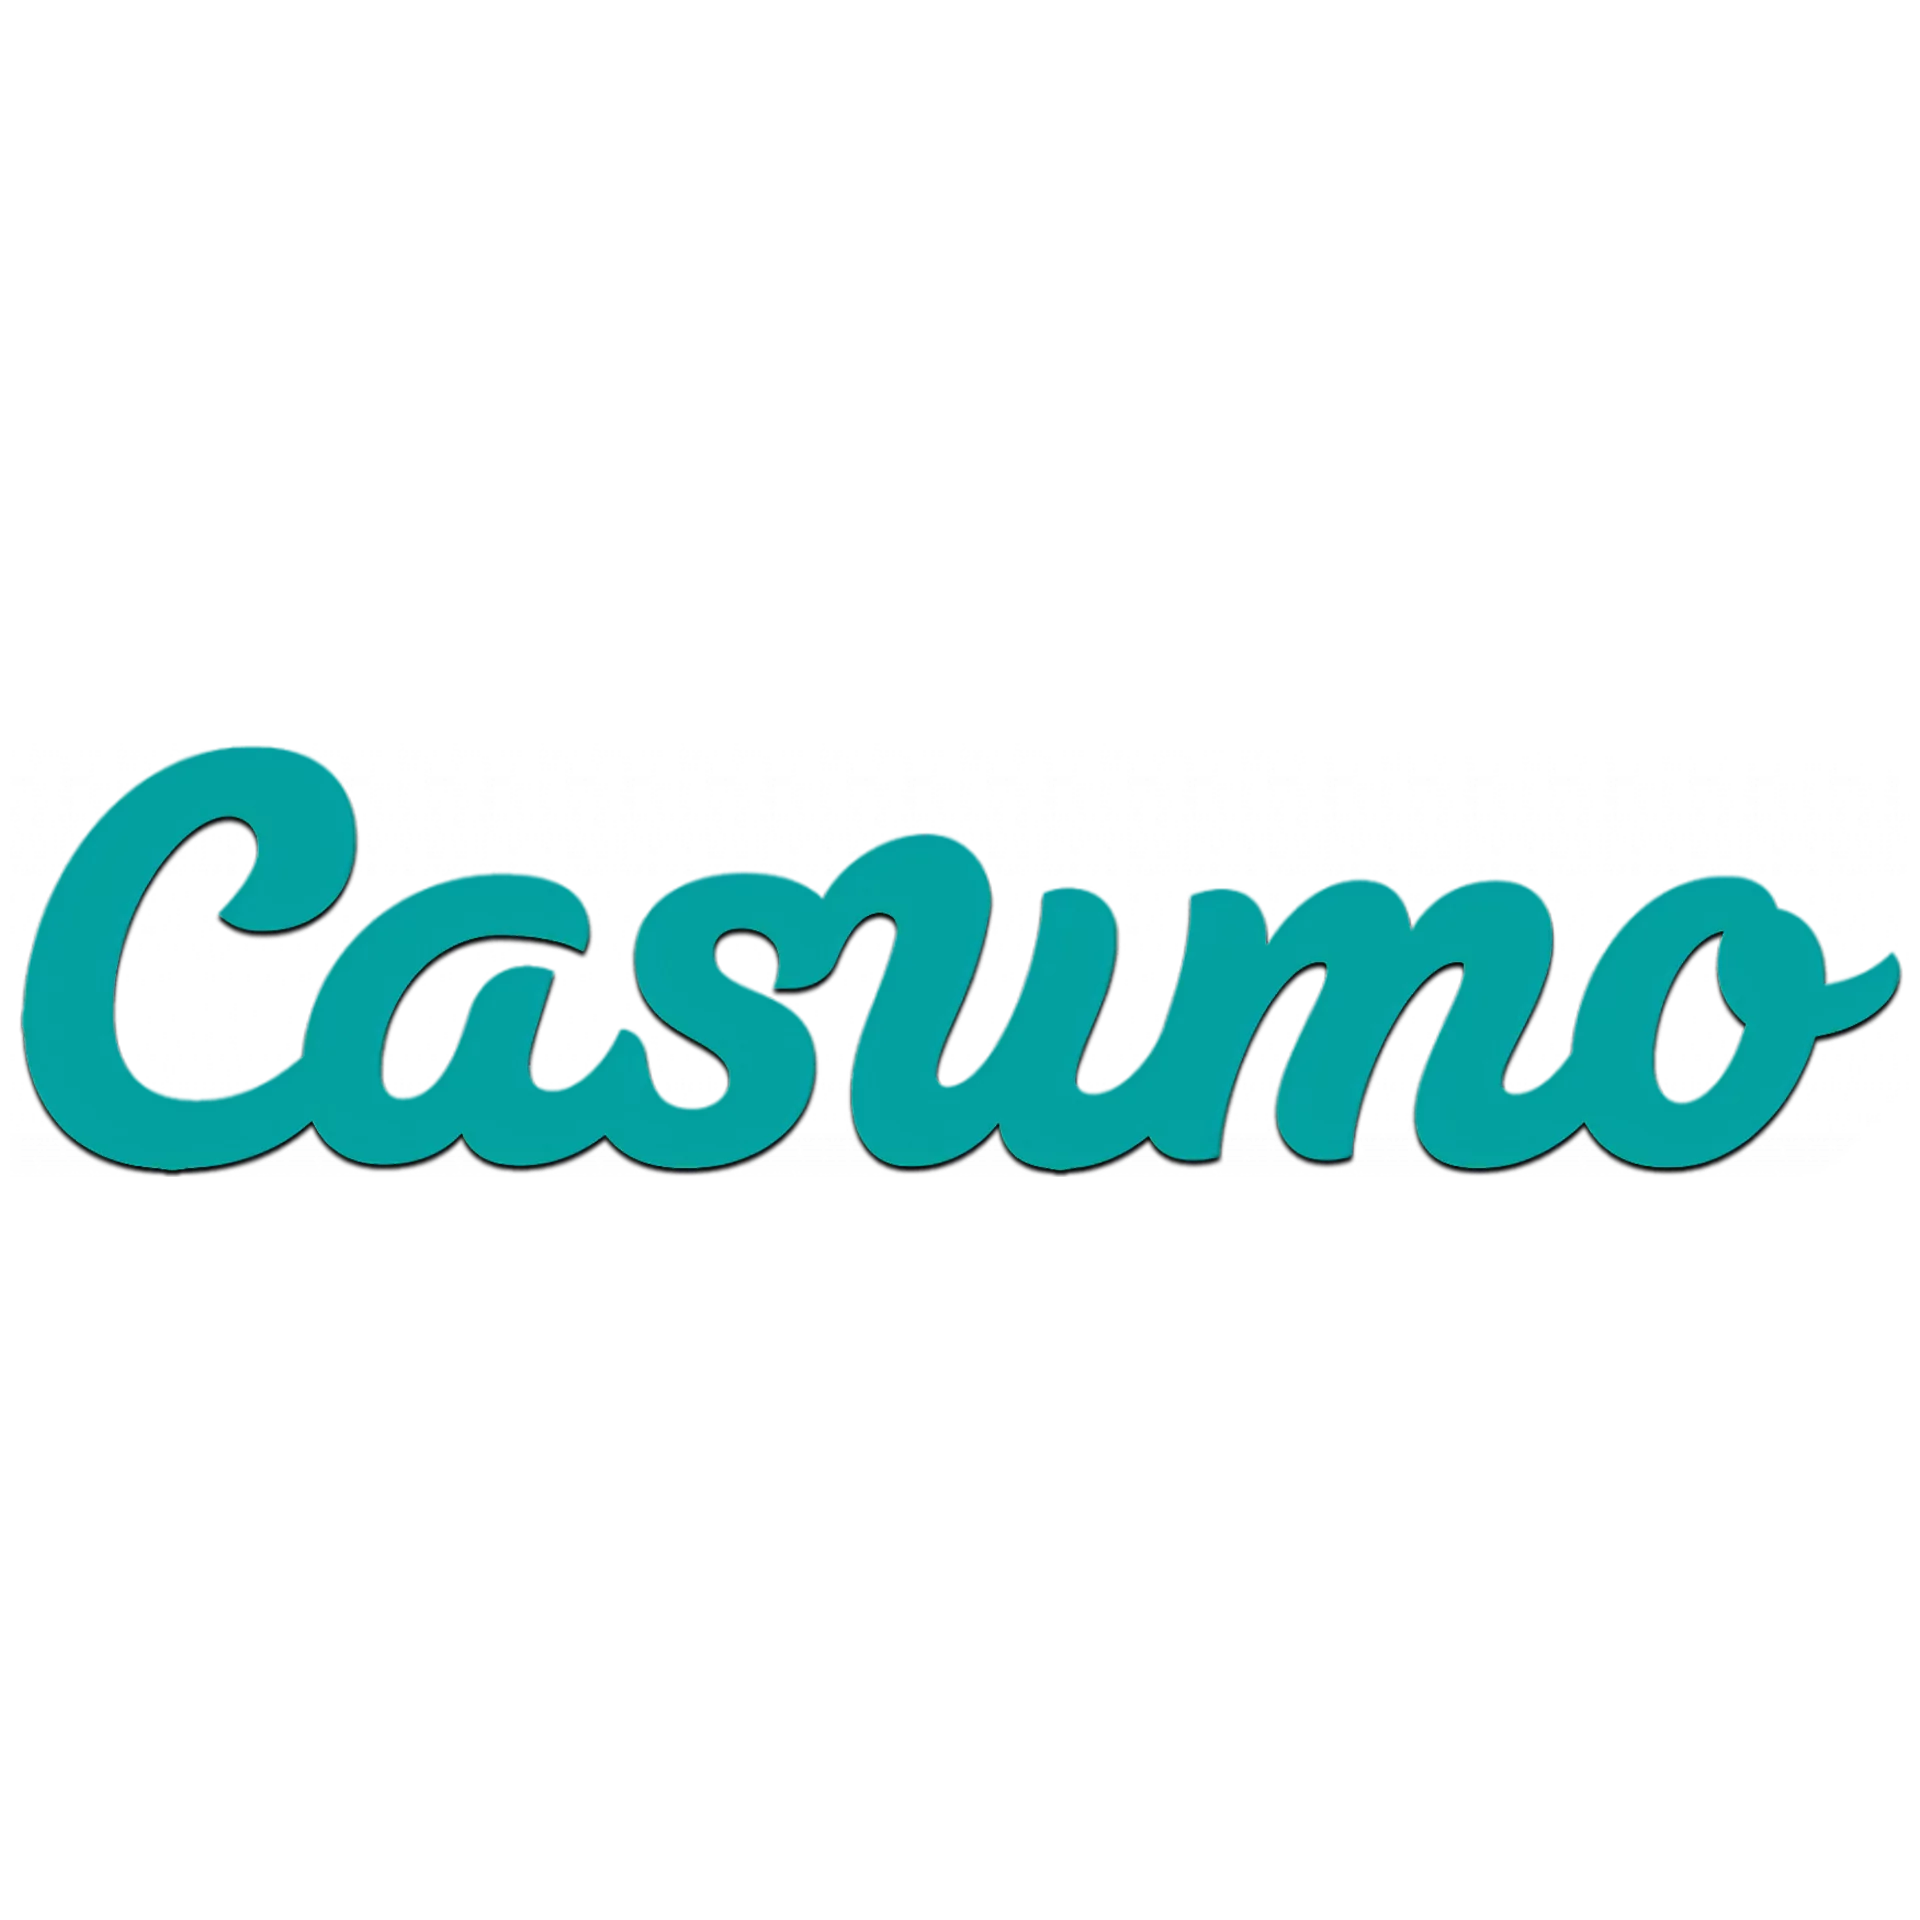 Casumo is a relatively new bookmaker office that attracts its users with a great design and contributions to the gambling industry.